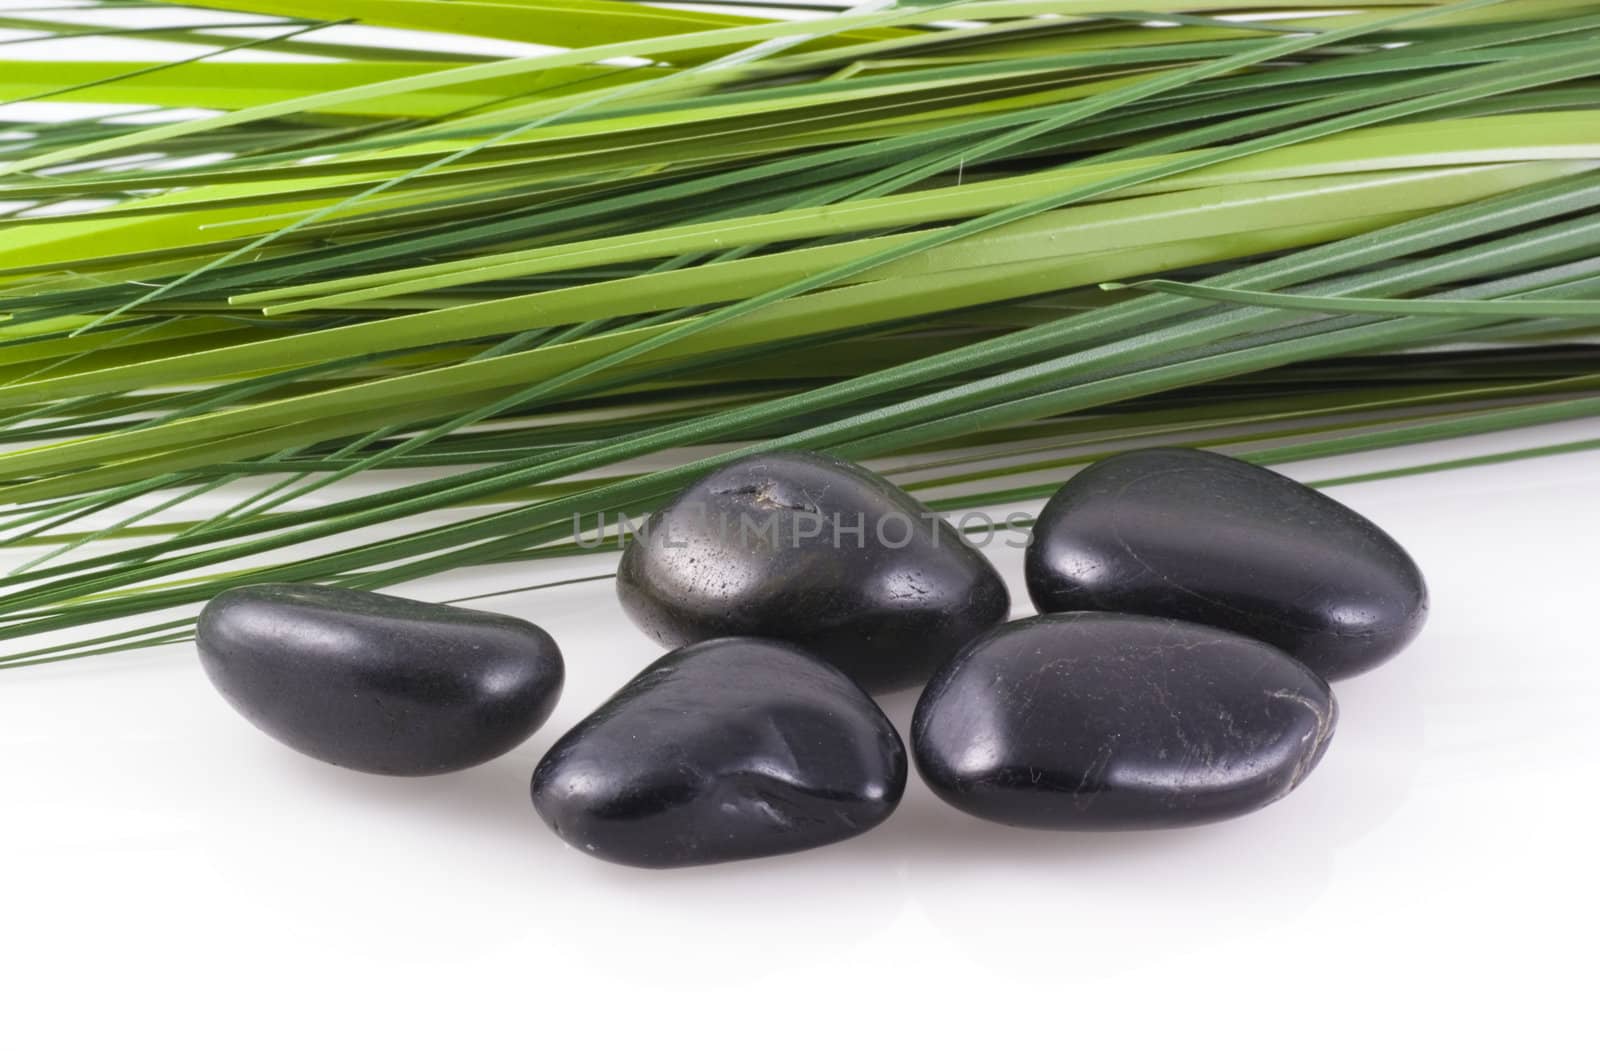 Zen stones with blades of grass in the back, isolated on white.